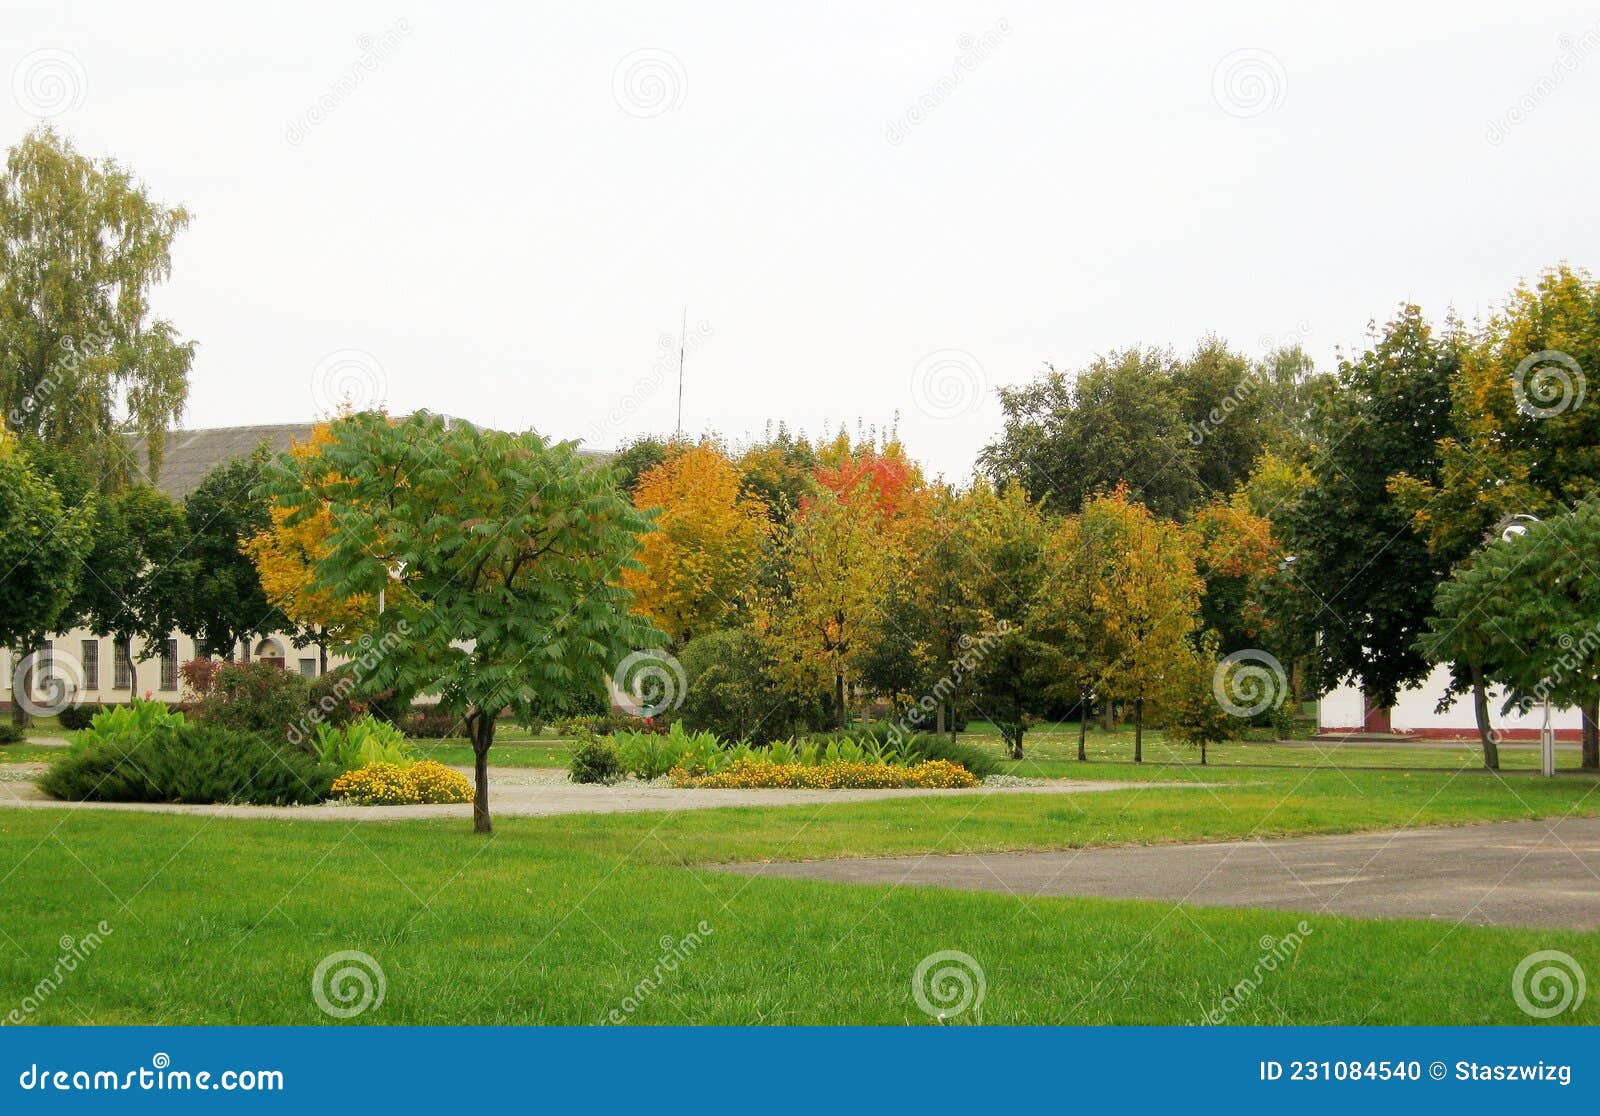 Autumn Landscape In The Park With Yellowing Trees Stock Photo Image